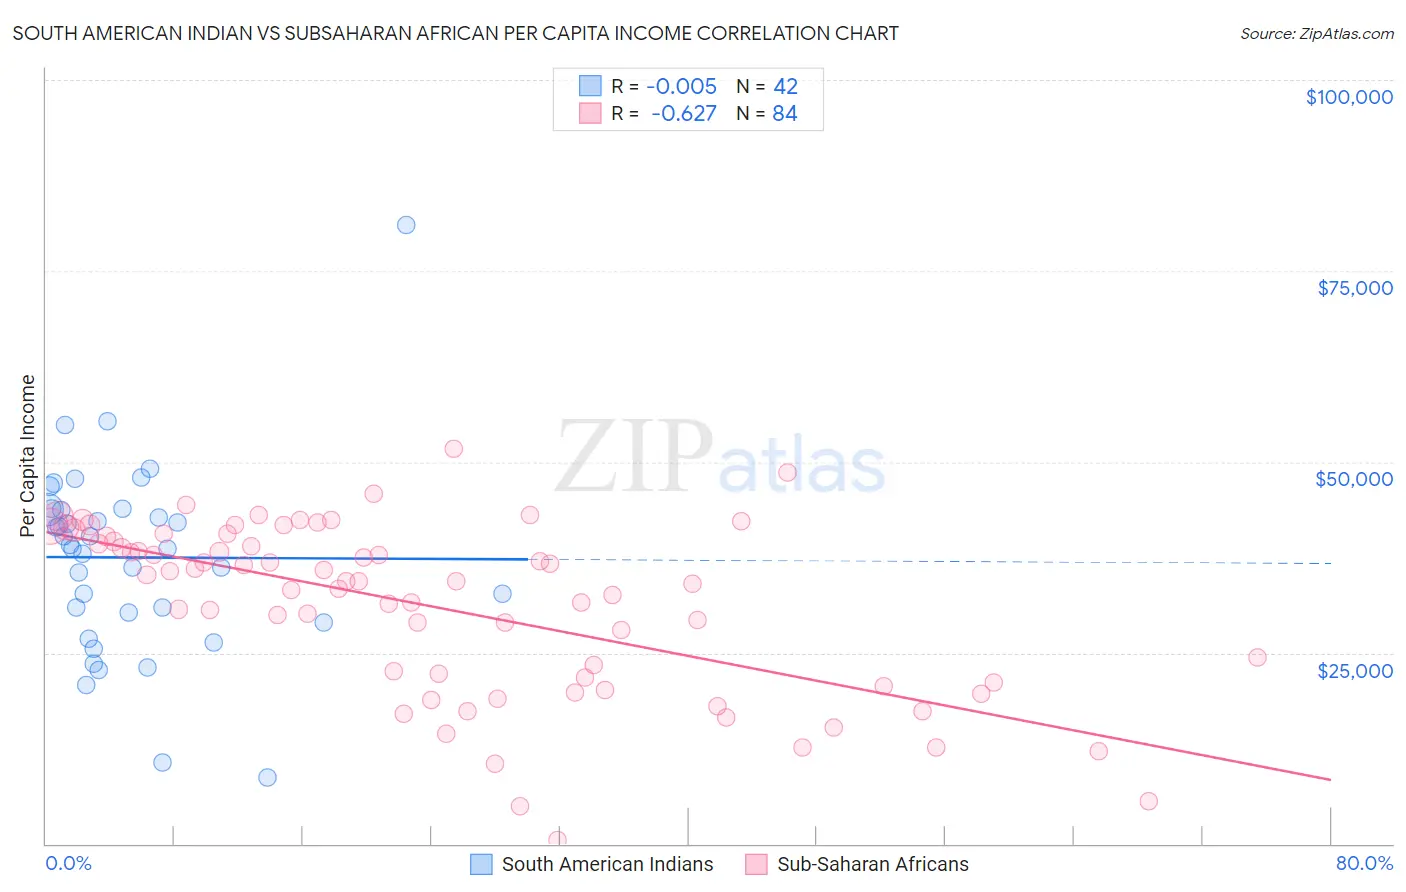 South American Indian vs Subsaharan African Per Capita Income